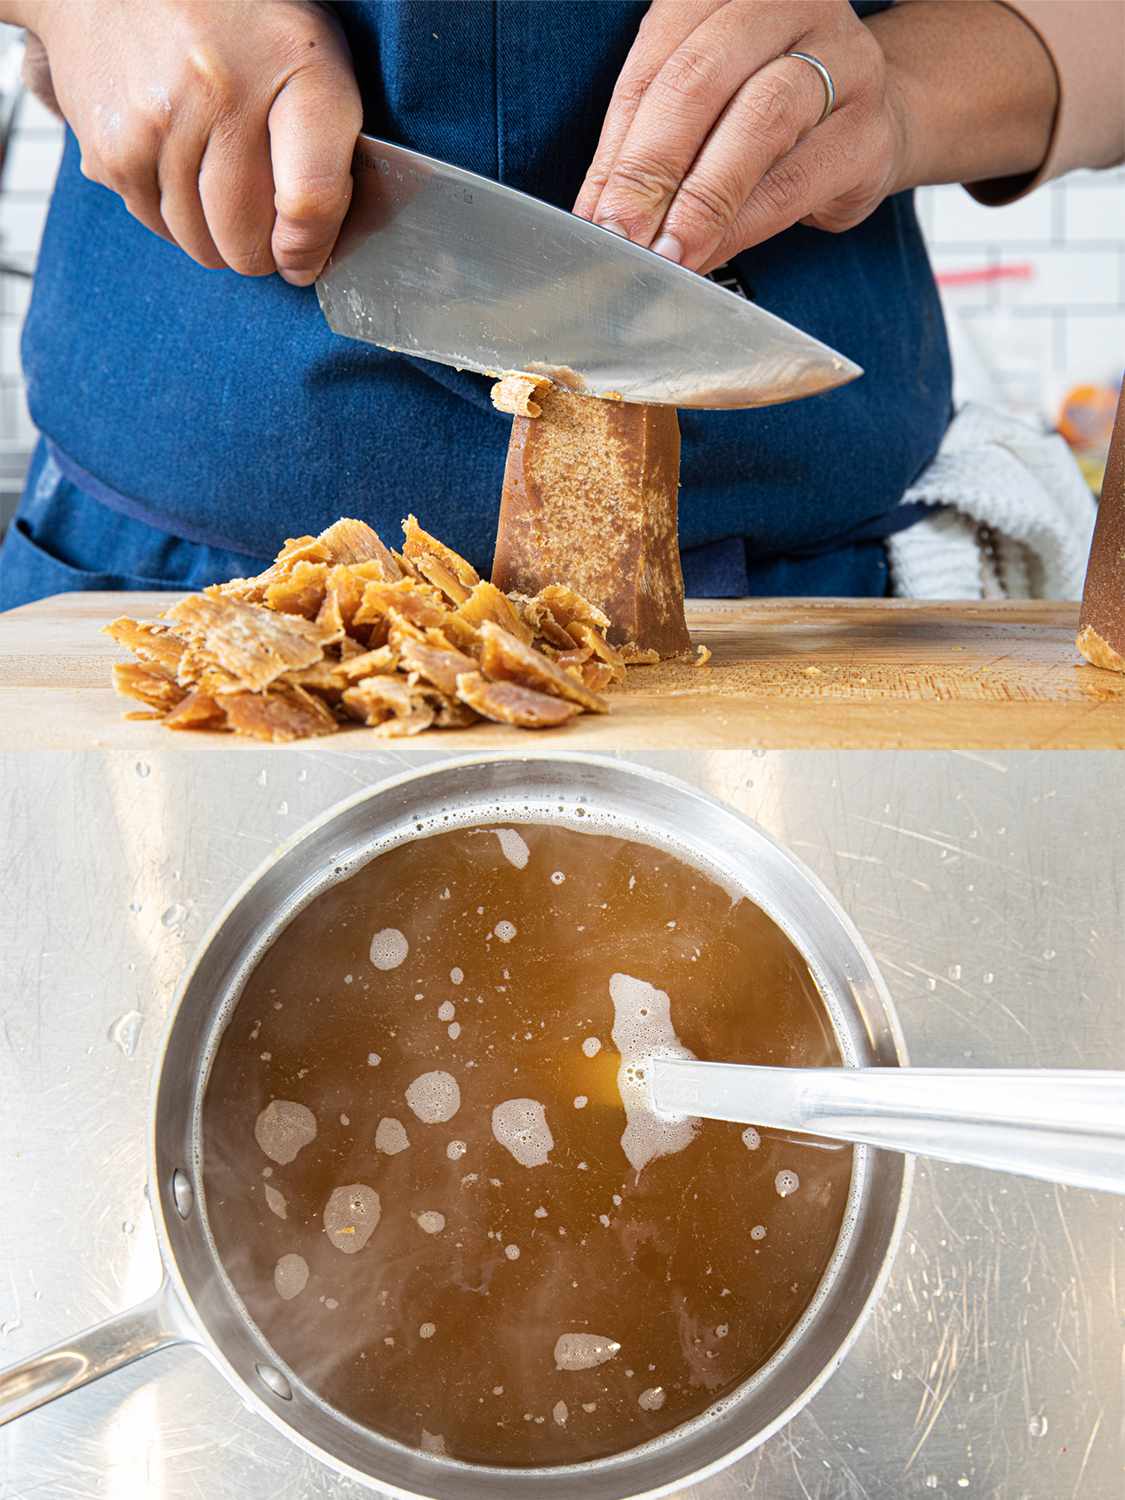 Two image collage of cutting sugar on a cutting board and then adding to a boiling pot of water